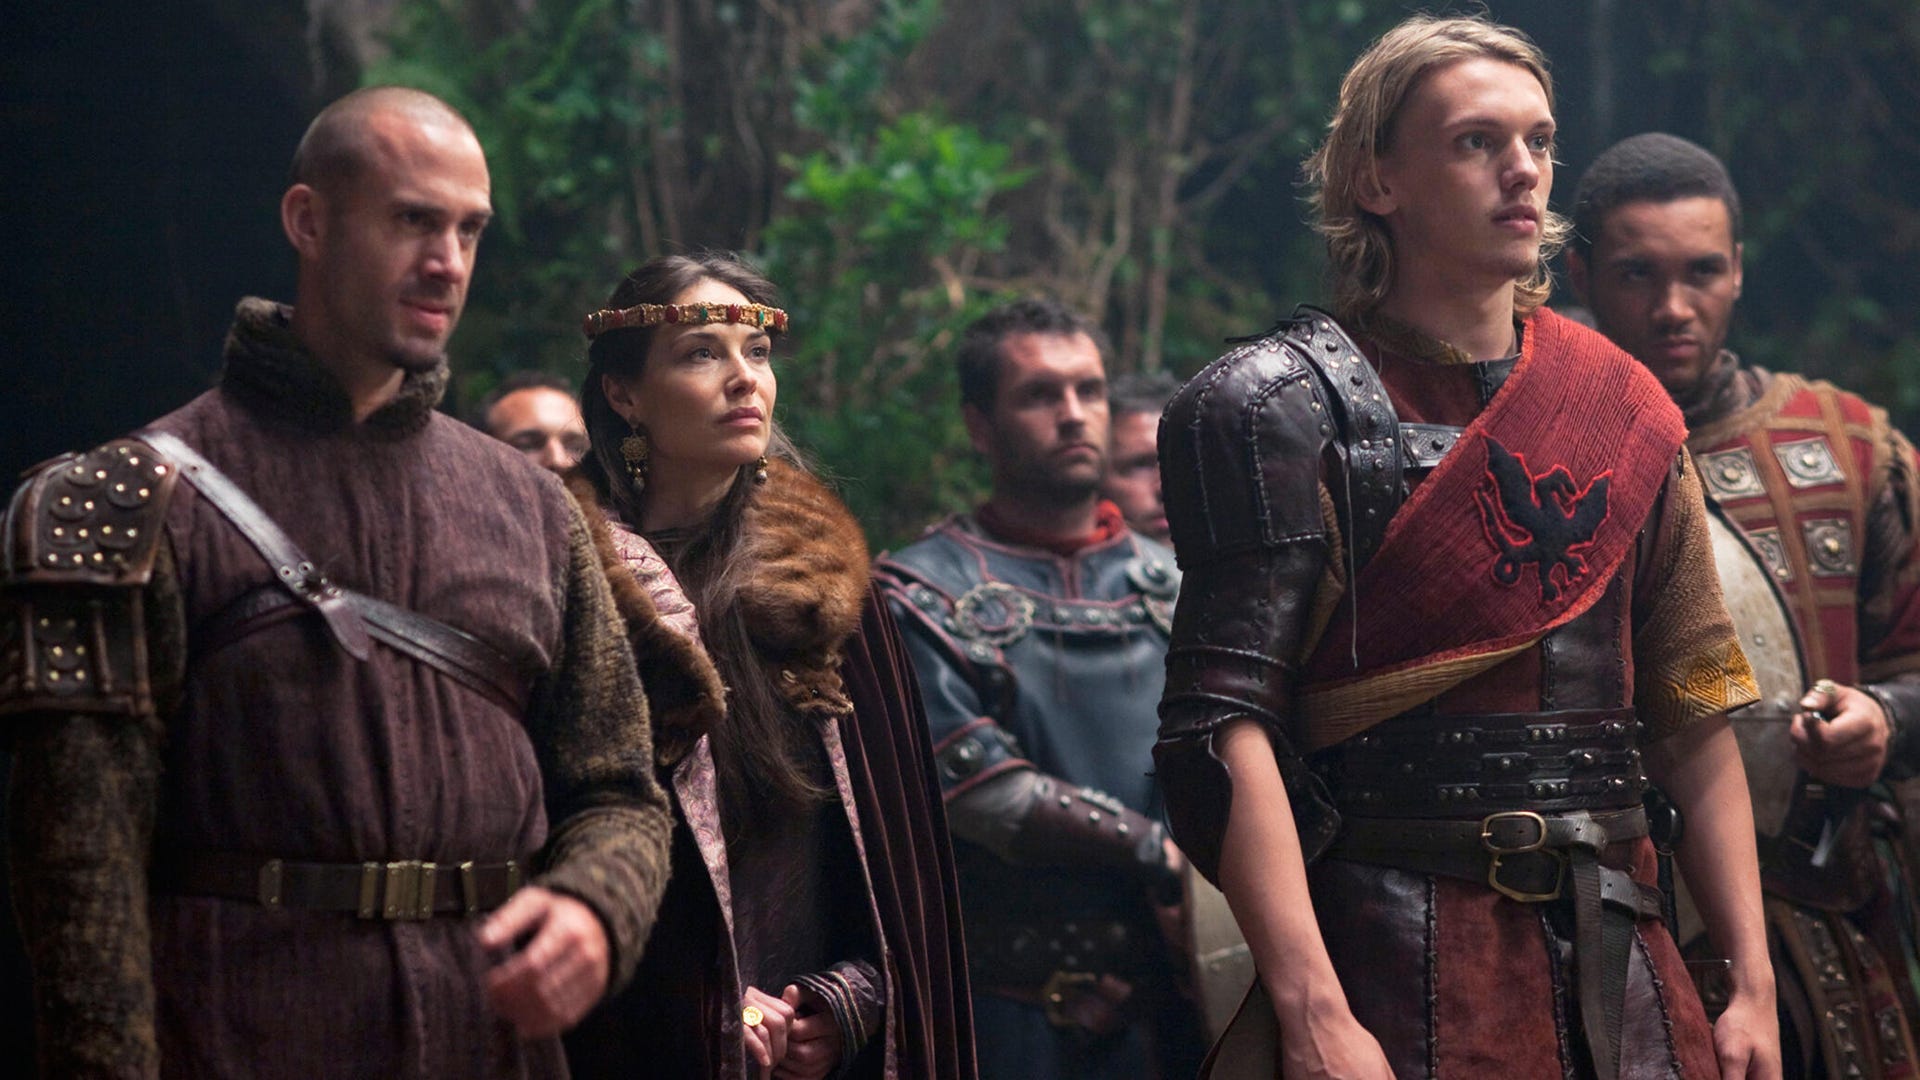 Joseph Fiennes and Jamie Campbell Bower, Camelot